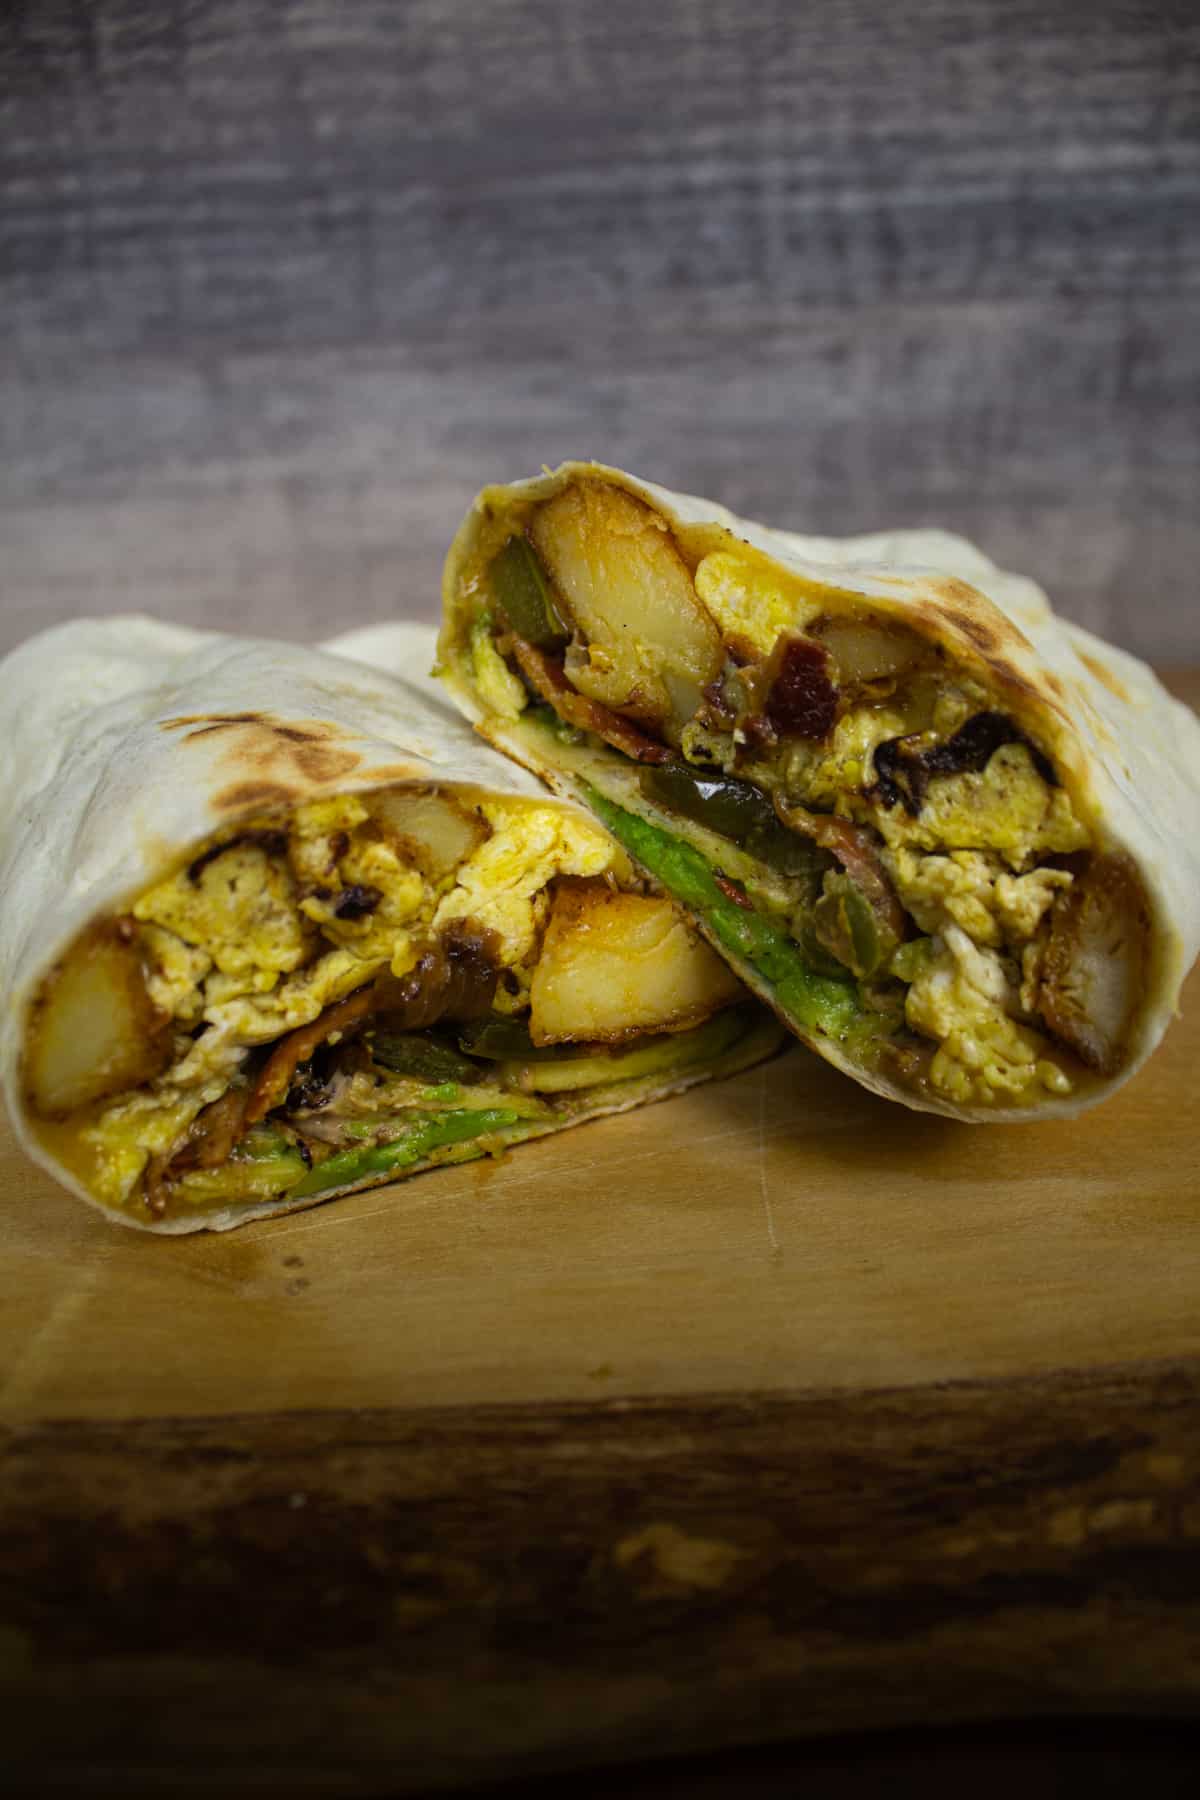 Southwest potato breakfast burrito cut in half showing potatoes, eggs, peppers and onions, bacon and cheese.